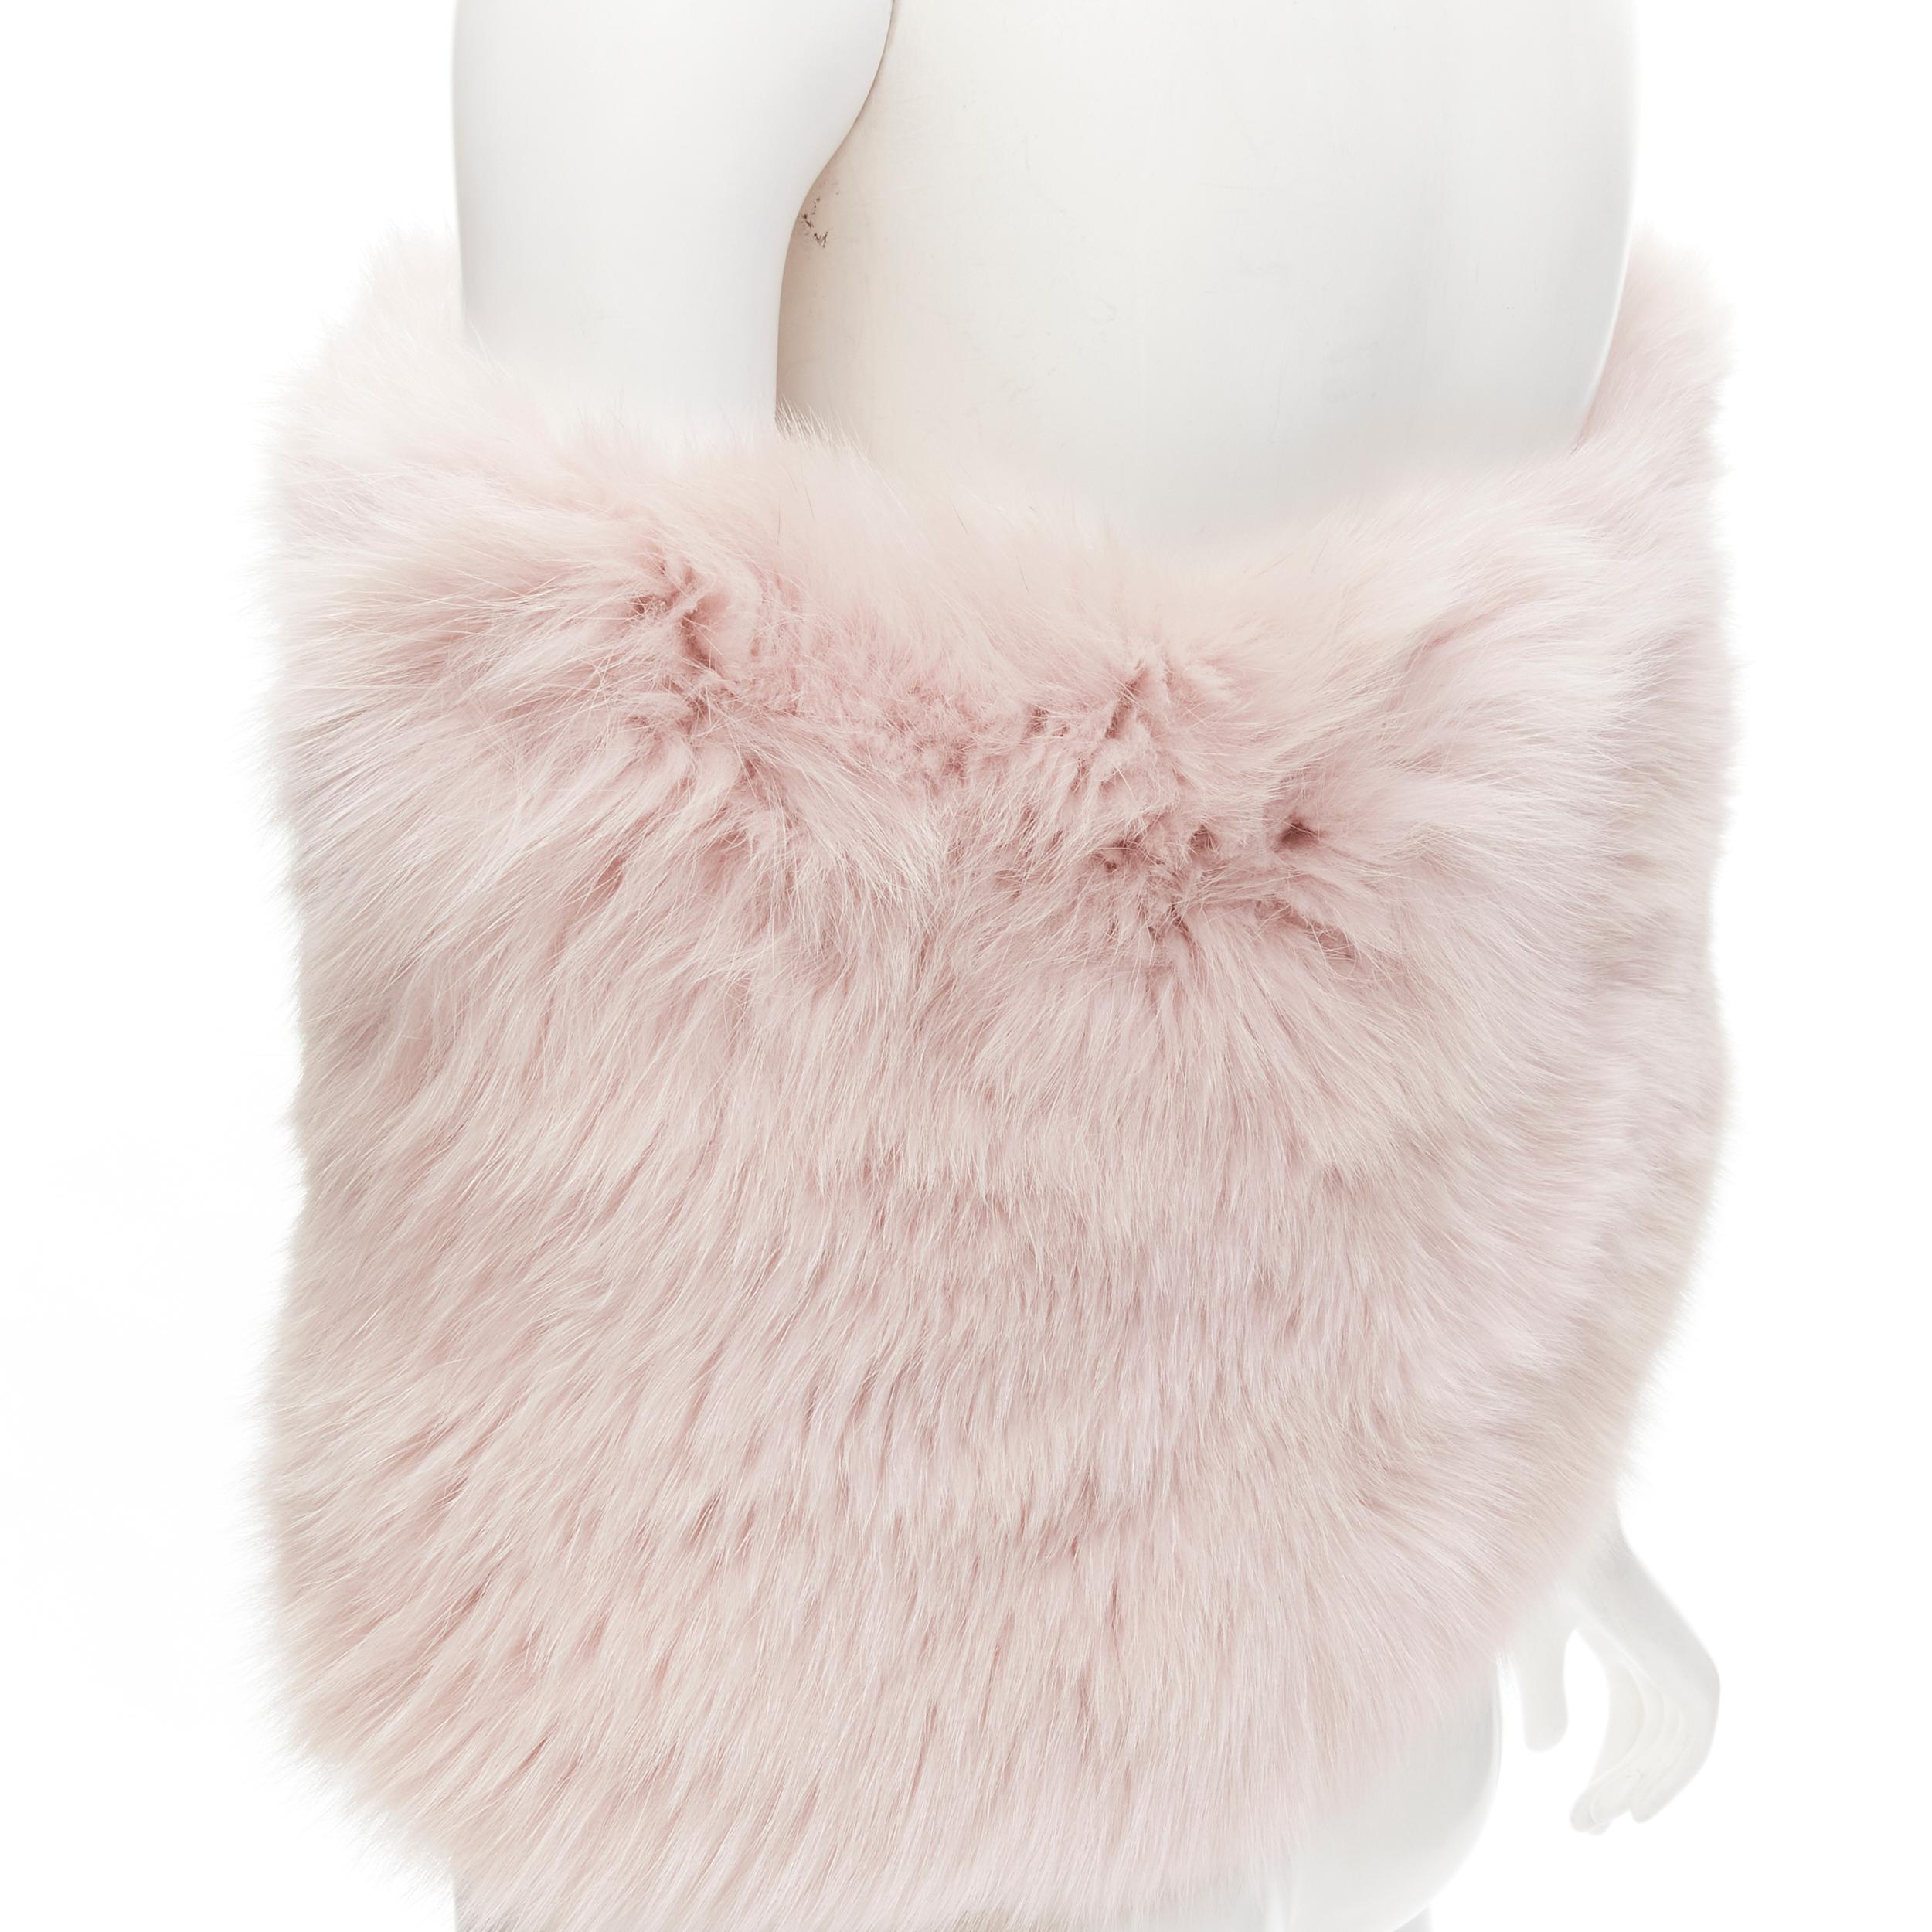 GUY LAROCHE Paris pink fur silk ribbon tie shawl scarf
Brand: Guy Laroche
Material: Fur
Color: Pink
Pattern: Solid
Closure: Self Tie

CONDITION:
Condition: Fair, this item was pre-owned and is in fair condition. 
Please refer to image gallery for